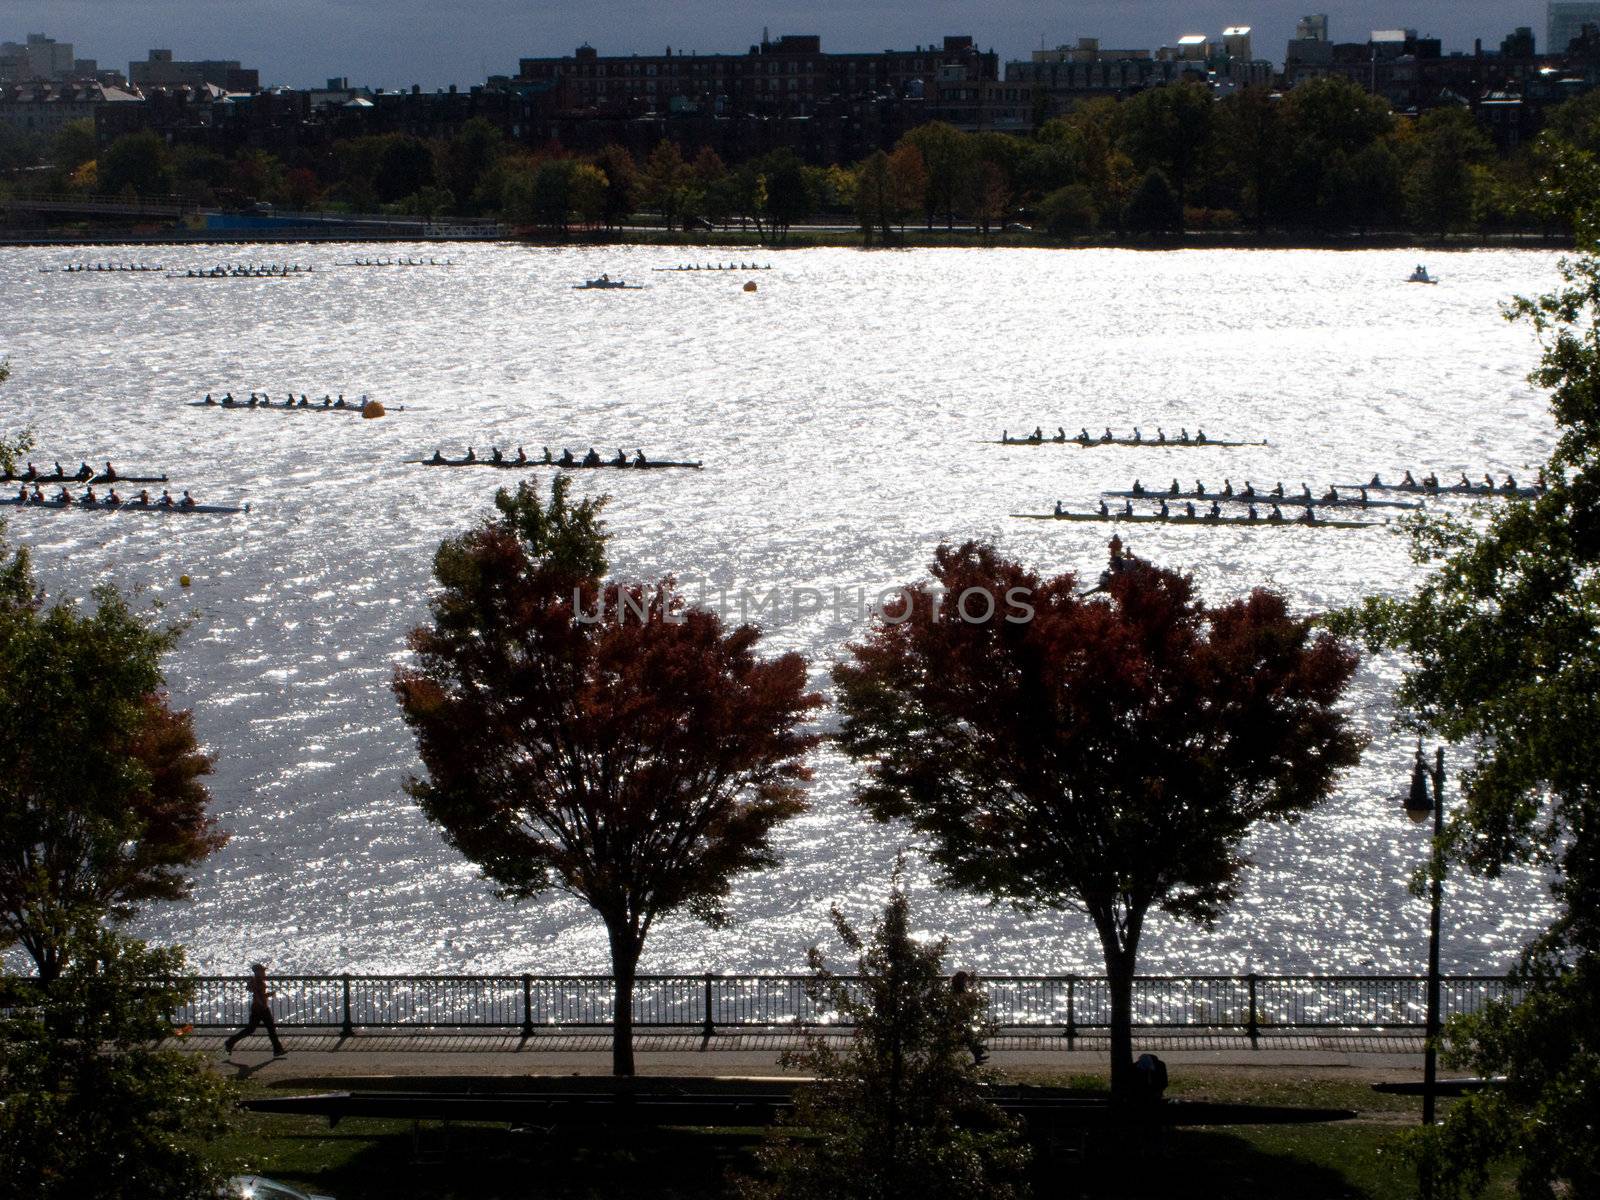 Charles River Rowers by edan